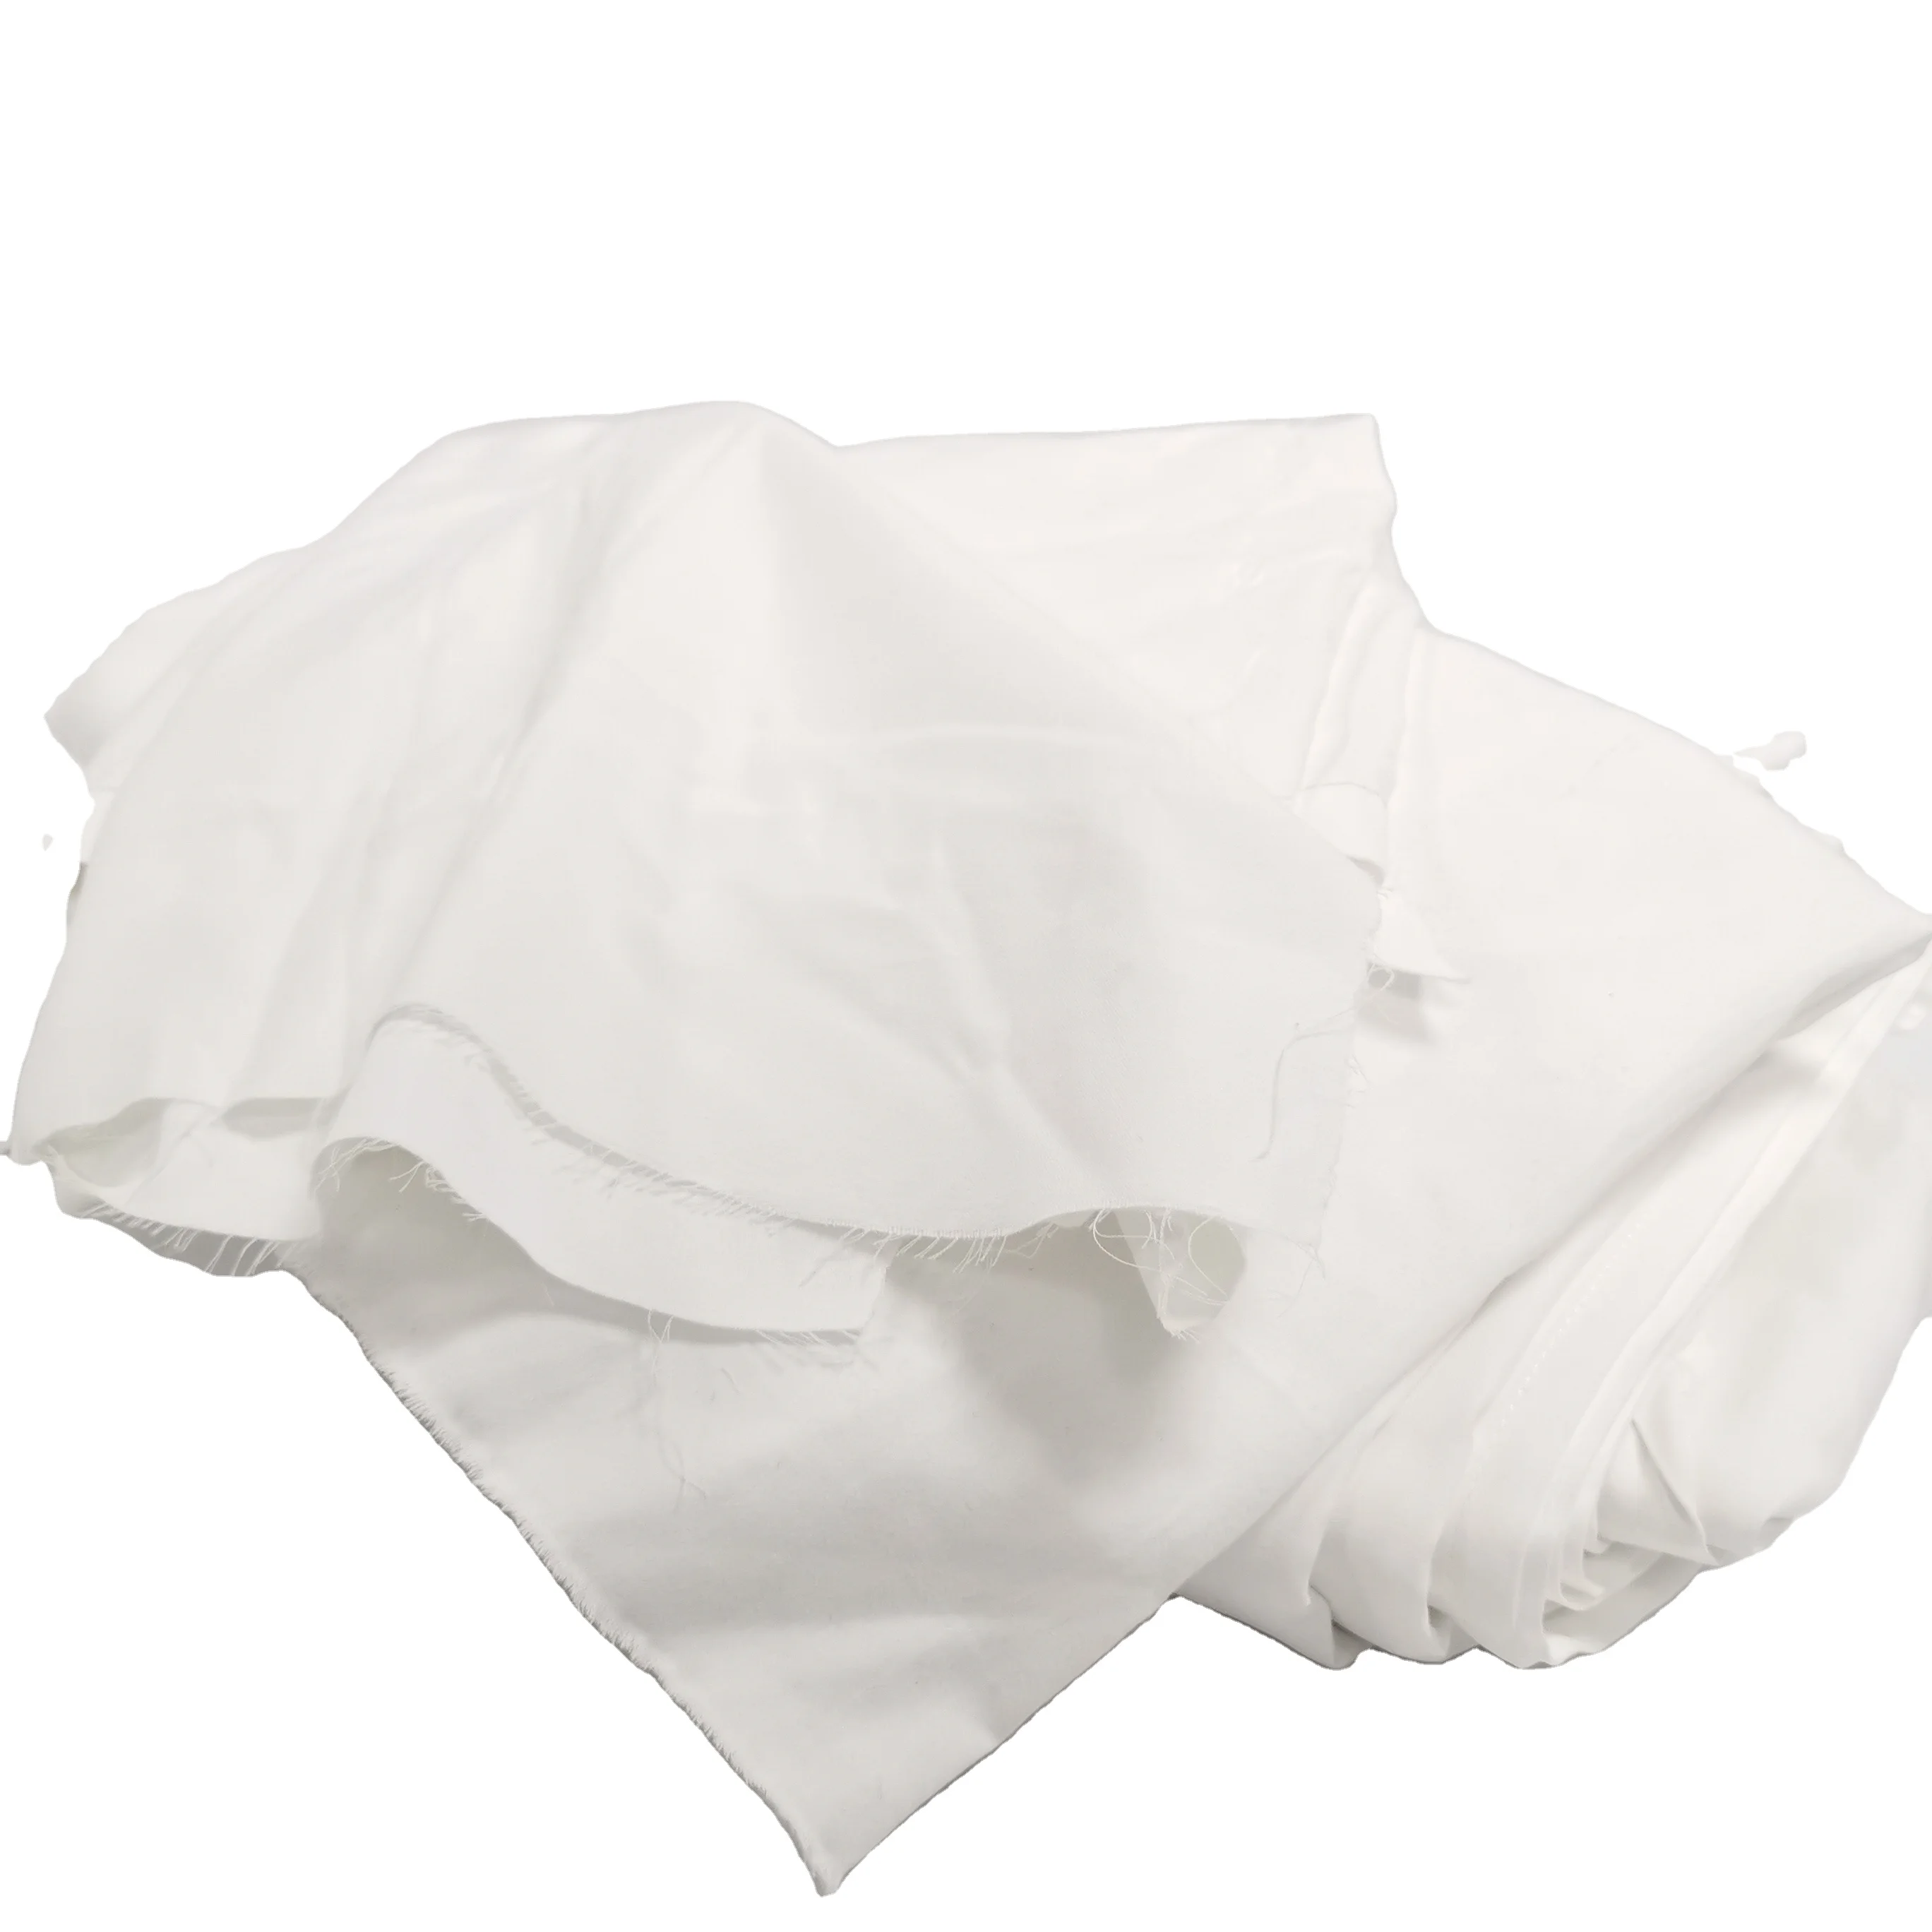 Workshop Wiping No Dirty Recycled Standard Size White Bed Sheet Cotton Rags